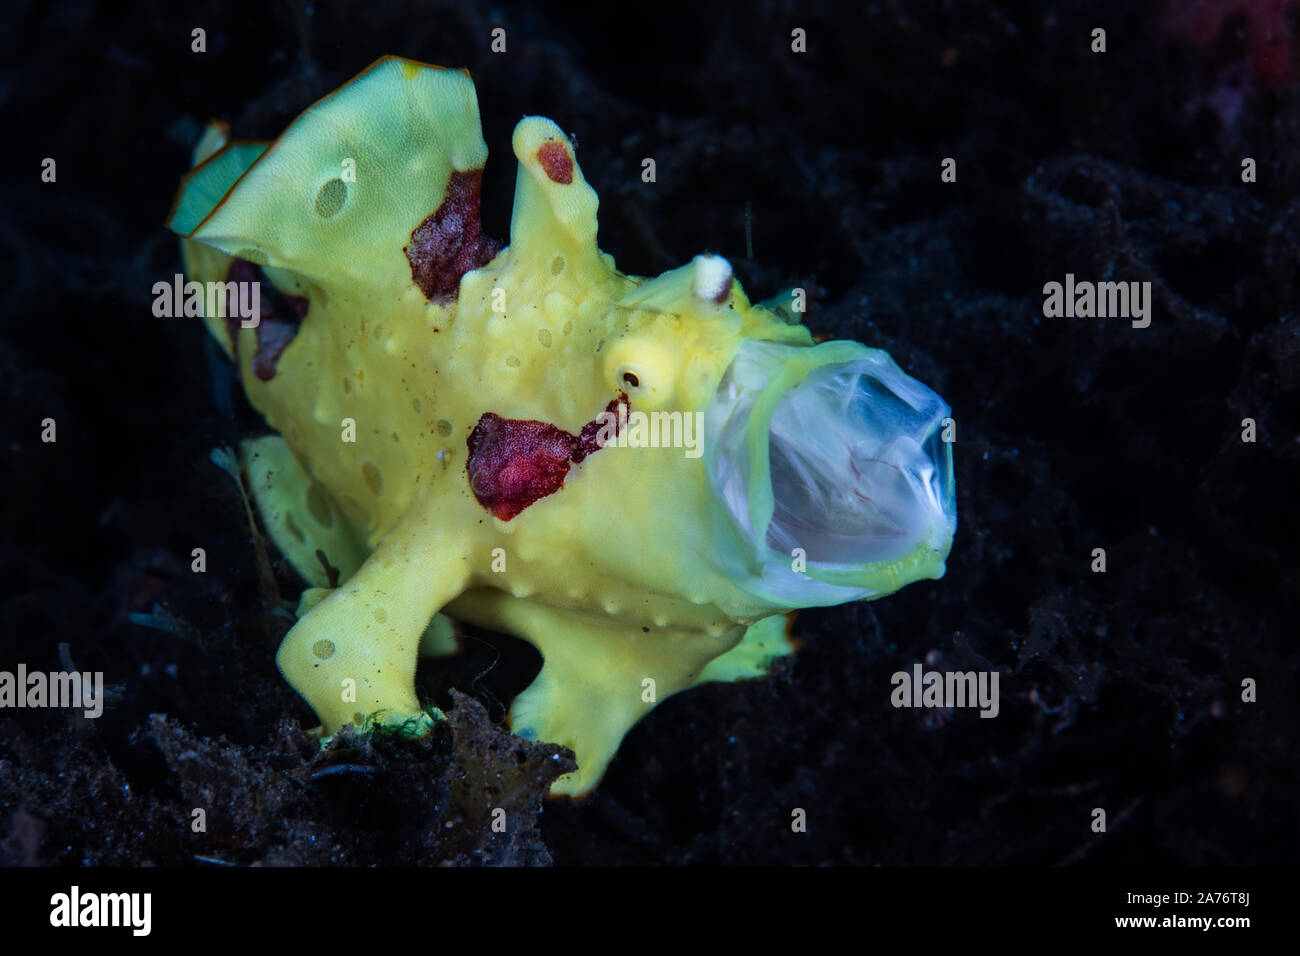 A brightly colored Warty frogfish, Antennarius maculatus, waits to ambush small prey on a black sand slope off Pulau Sangeang in Indonesia. Stock Photo